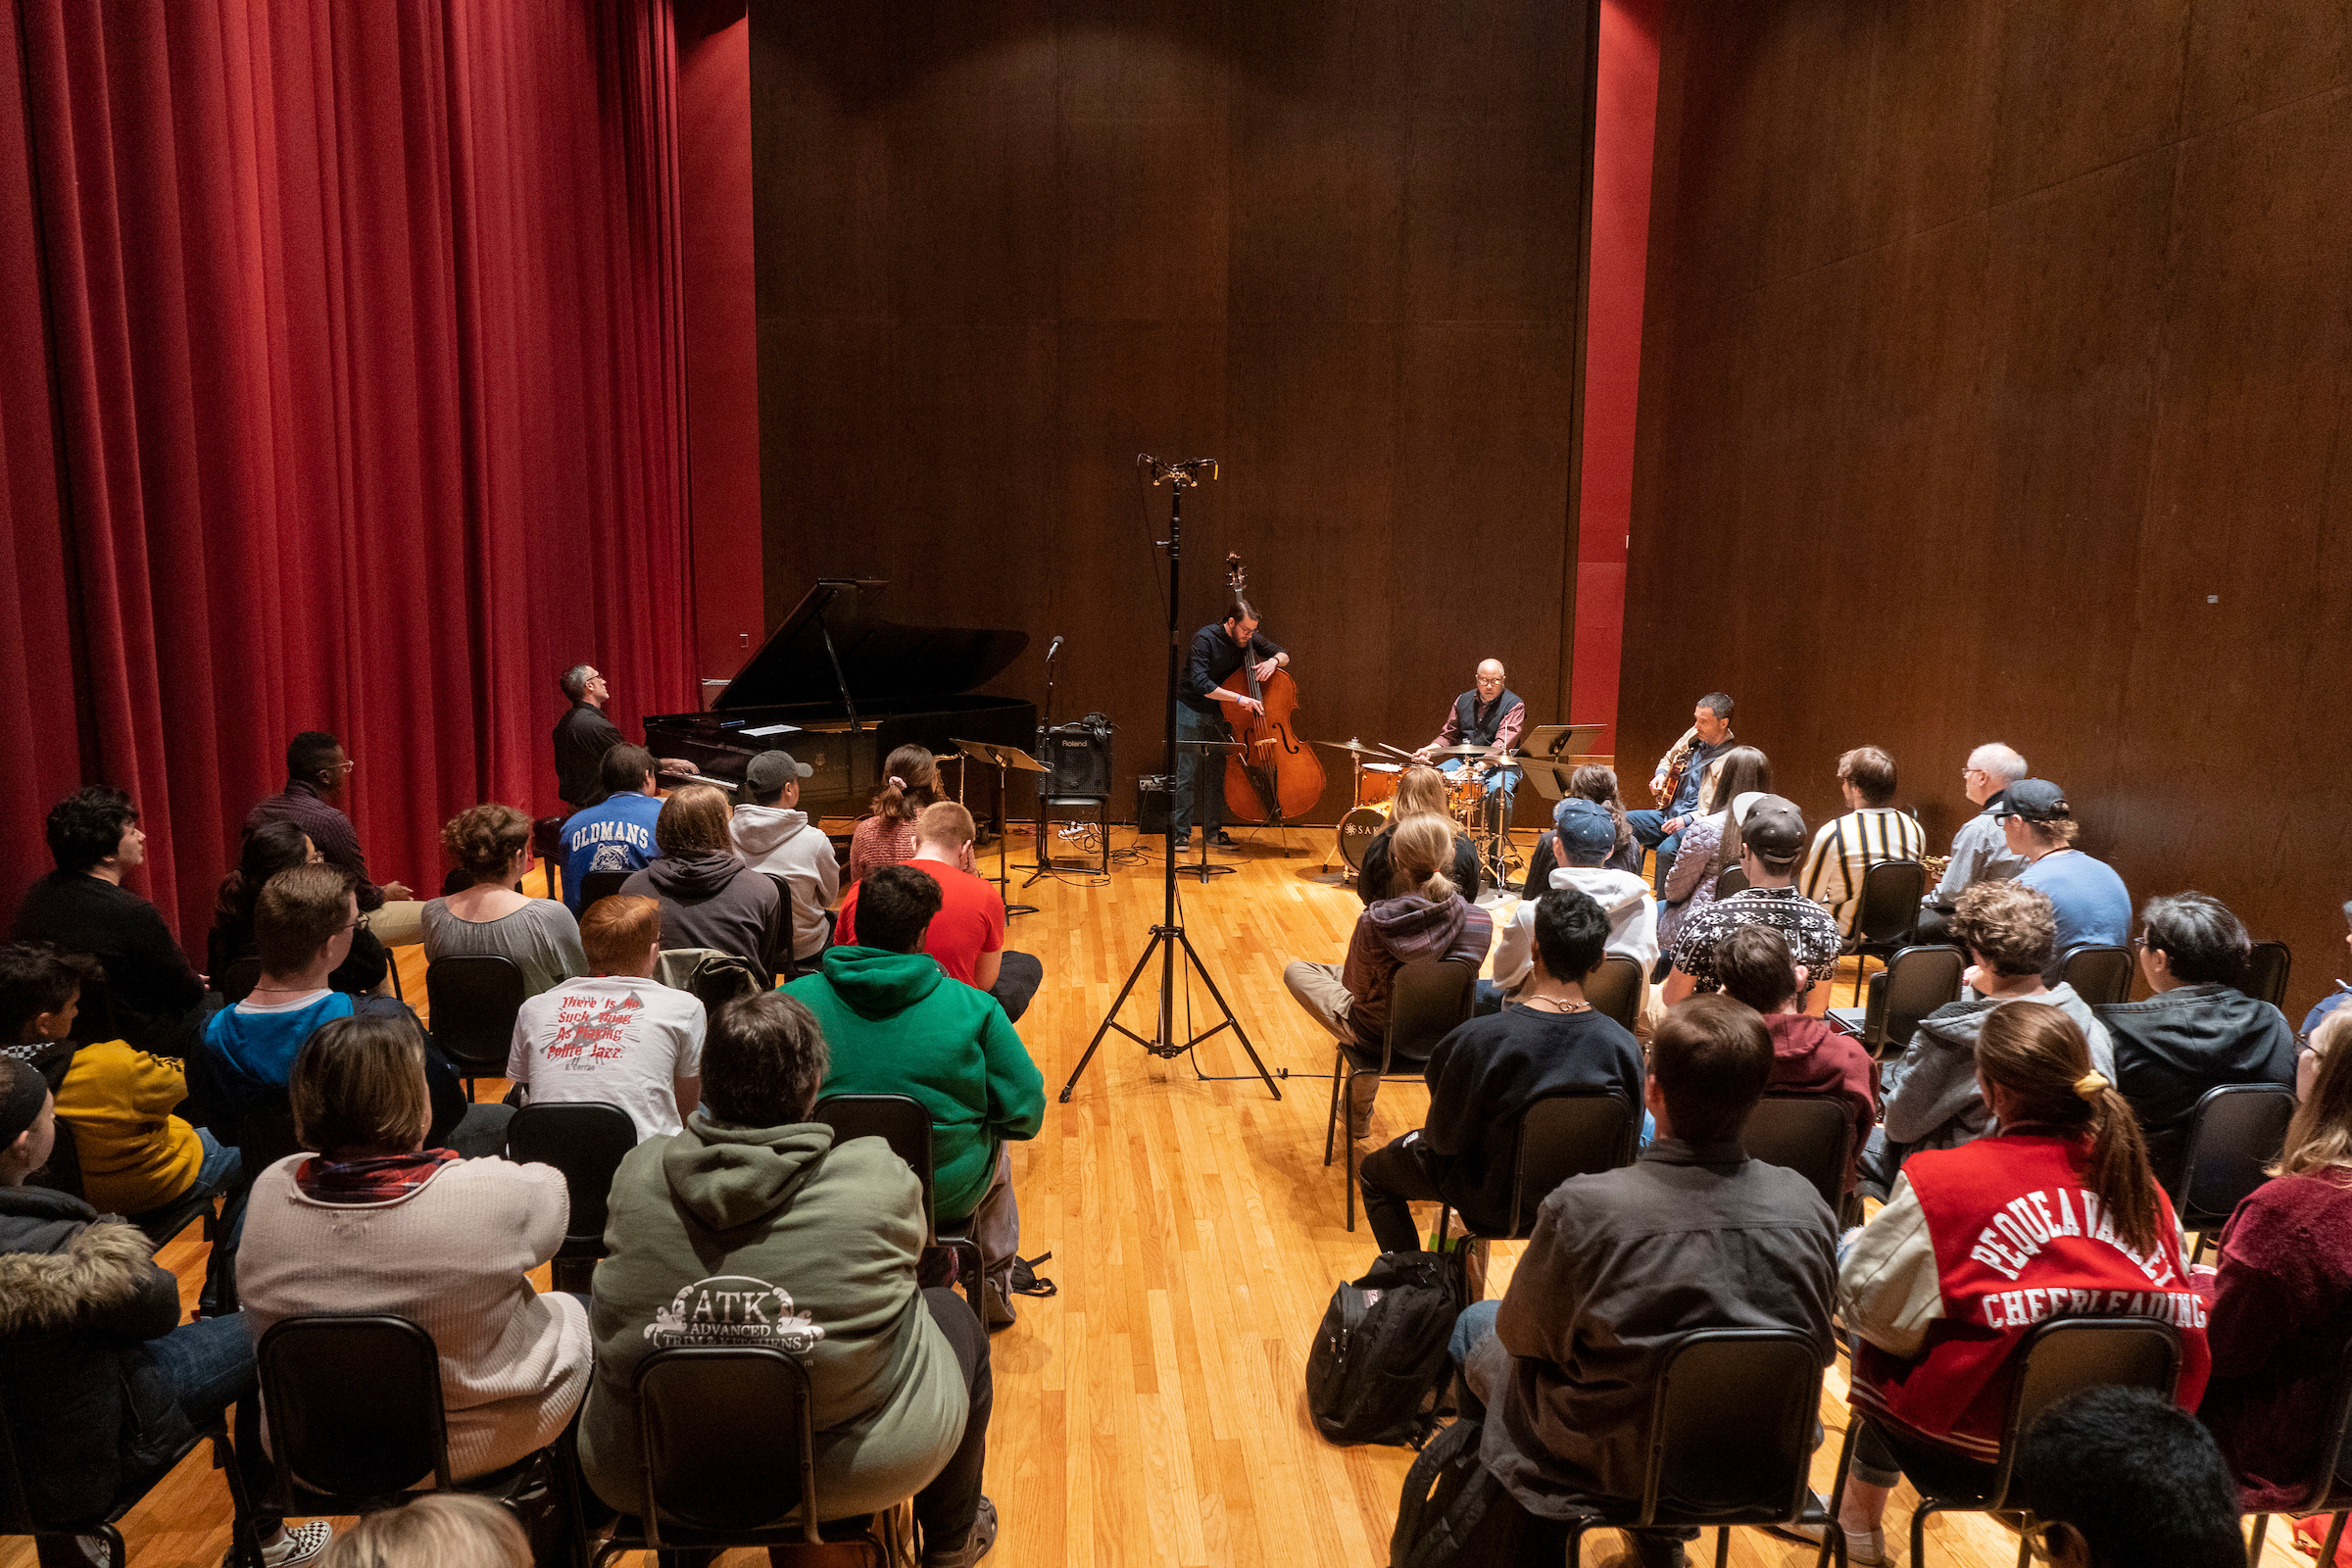 An hour of jazz music by LVC faculty and students.